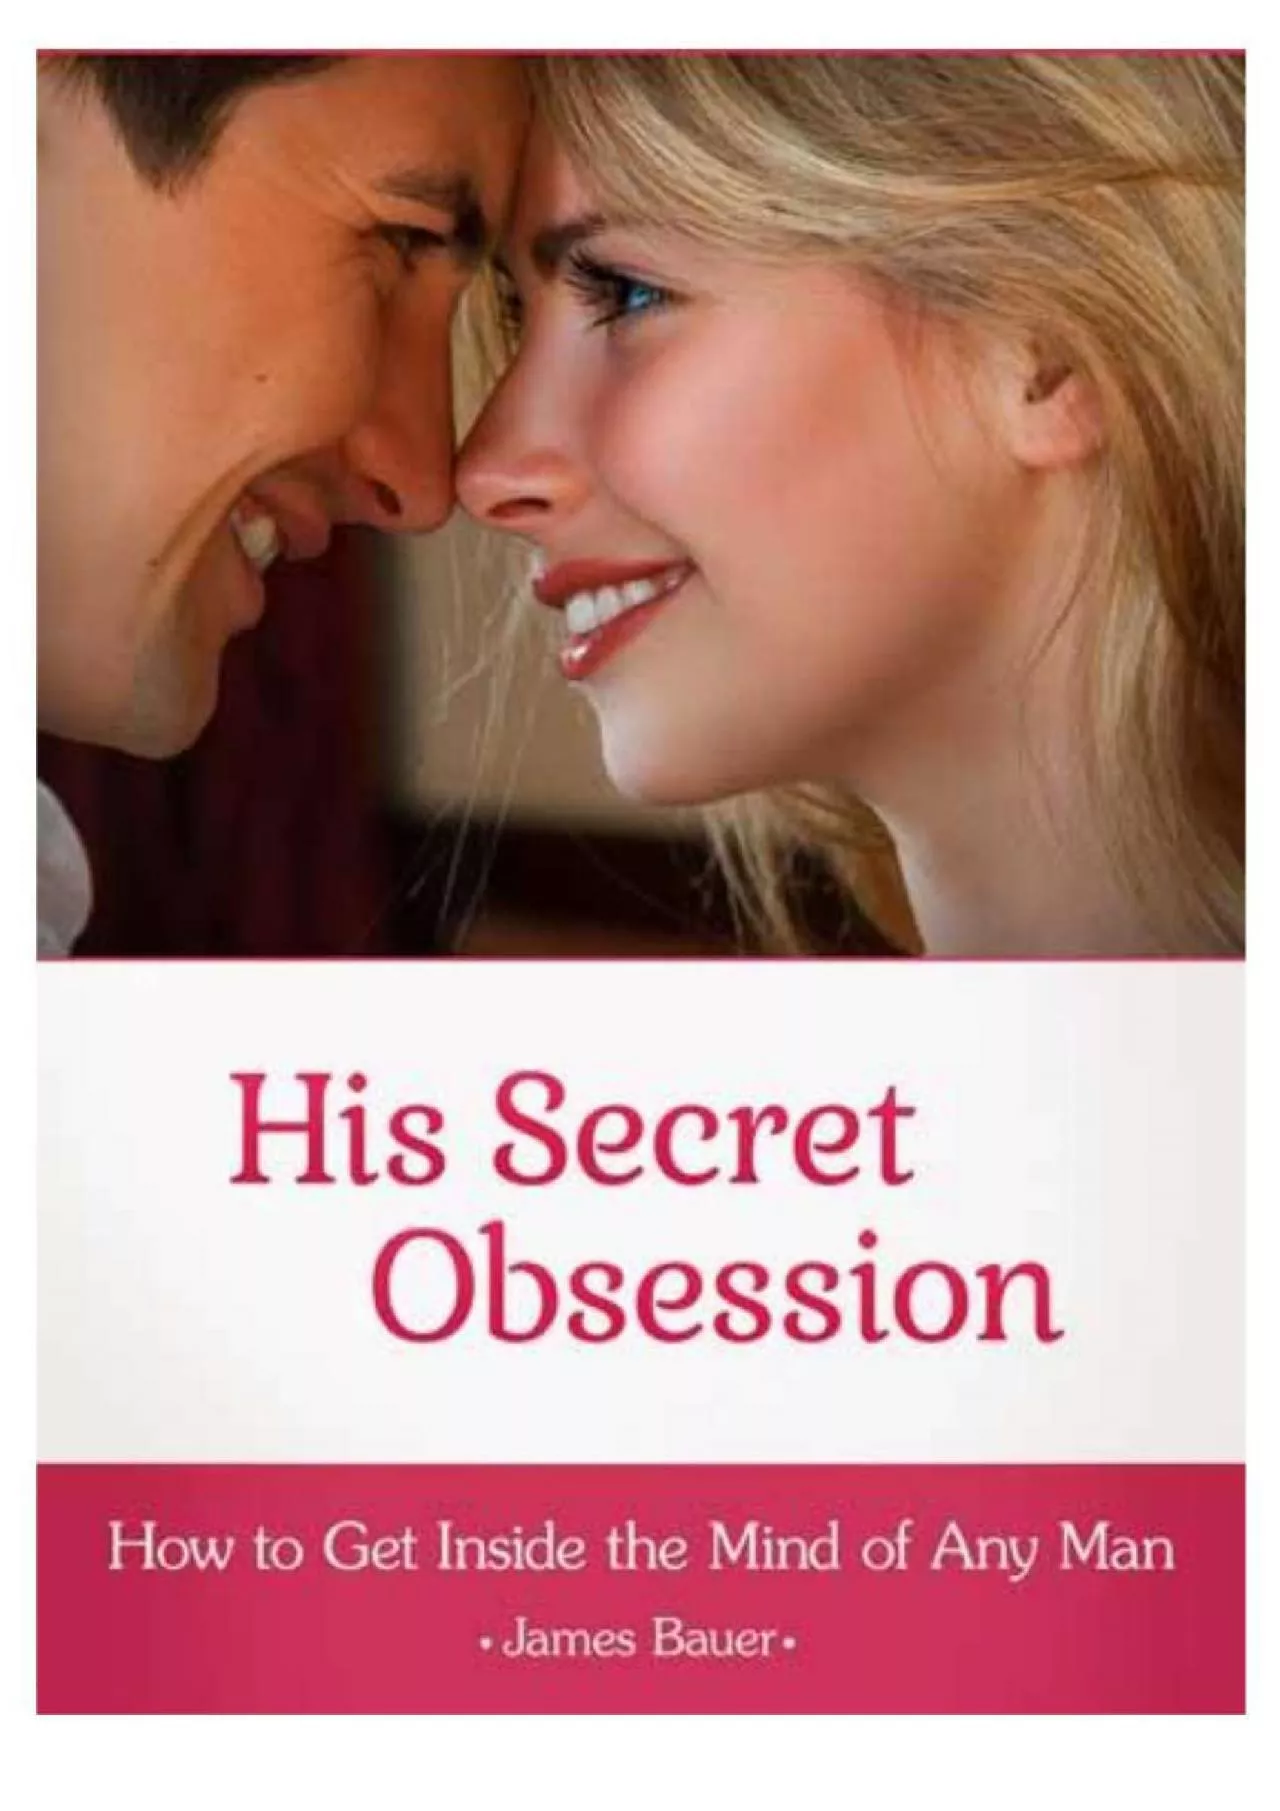 His Secret Obsession PDF, James Bauer BOOK | FREE DOWNLOAD EXCLUSIVE REPORT